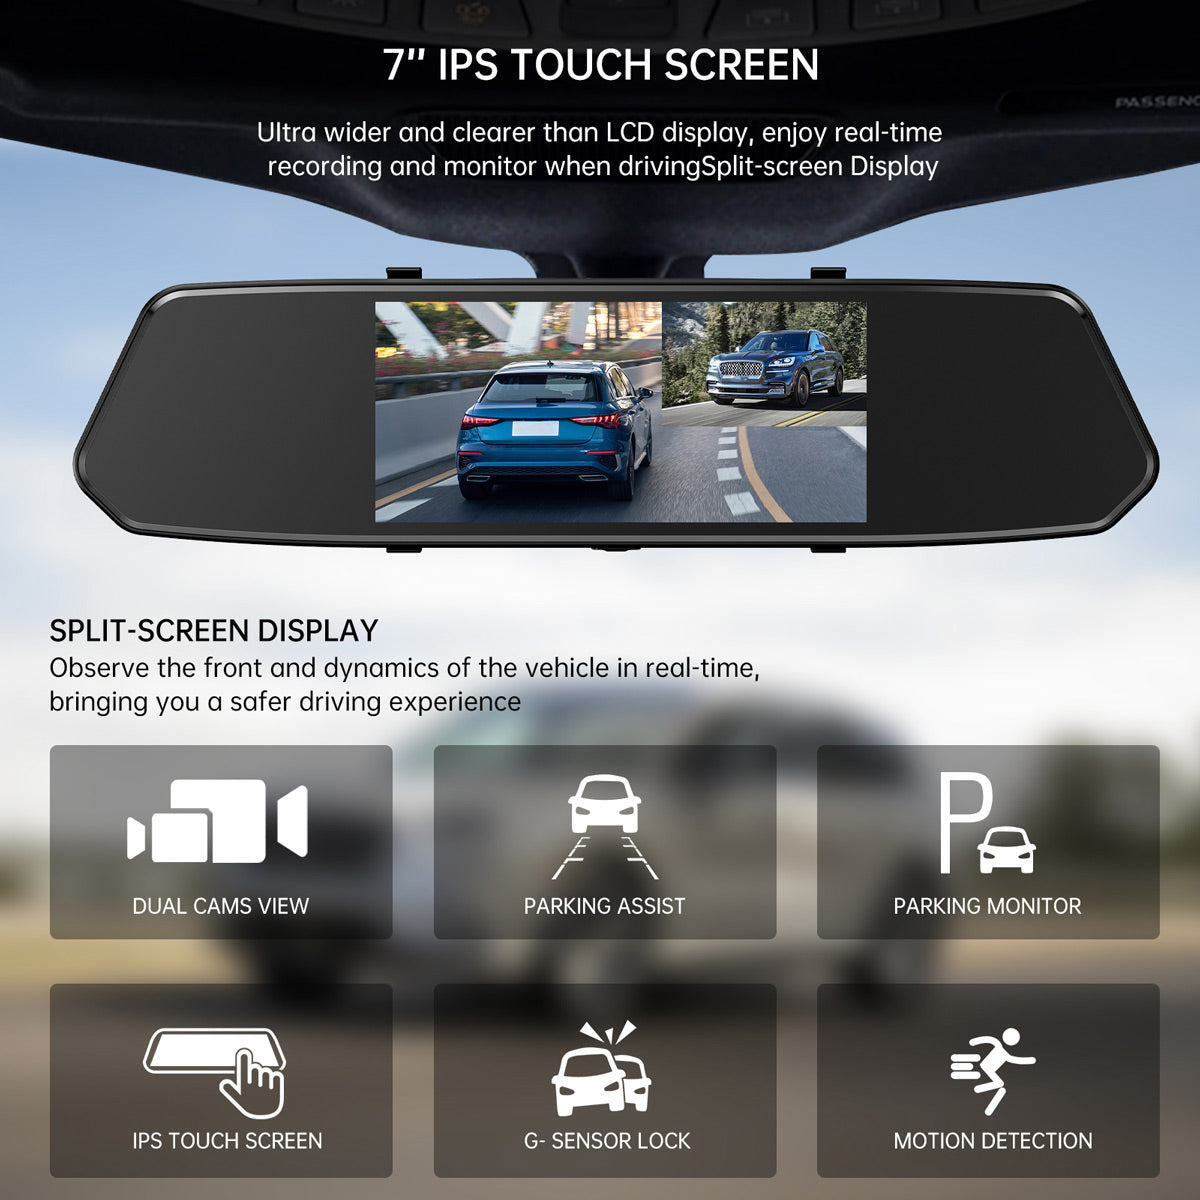 Campark CE35A 1080P Front and Rear Mirror Dash Cam with 7" Touchscreen